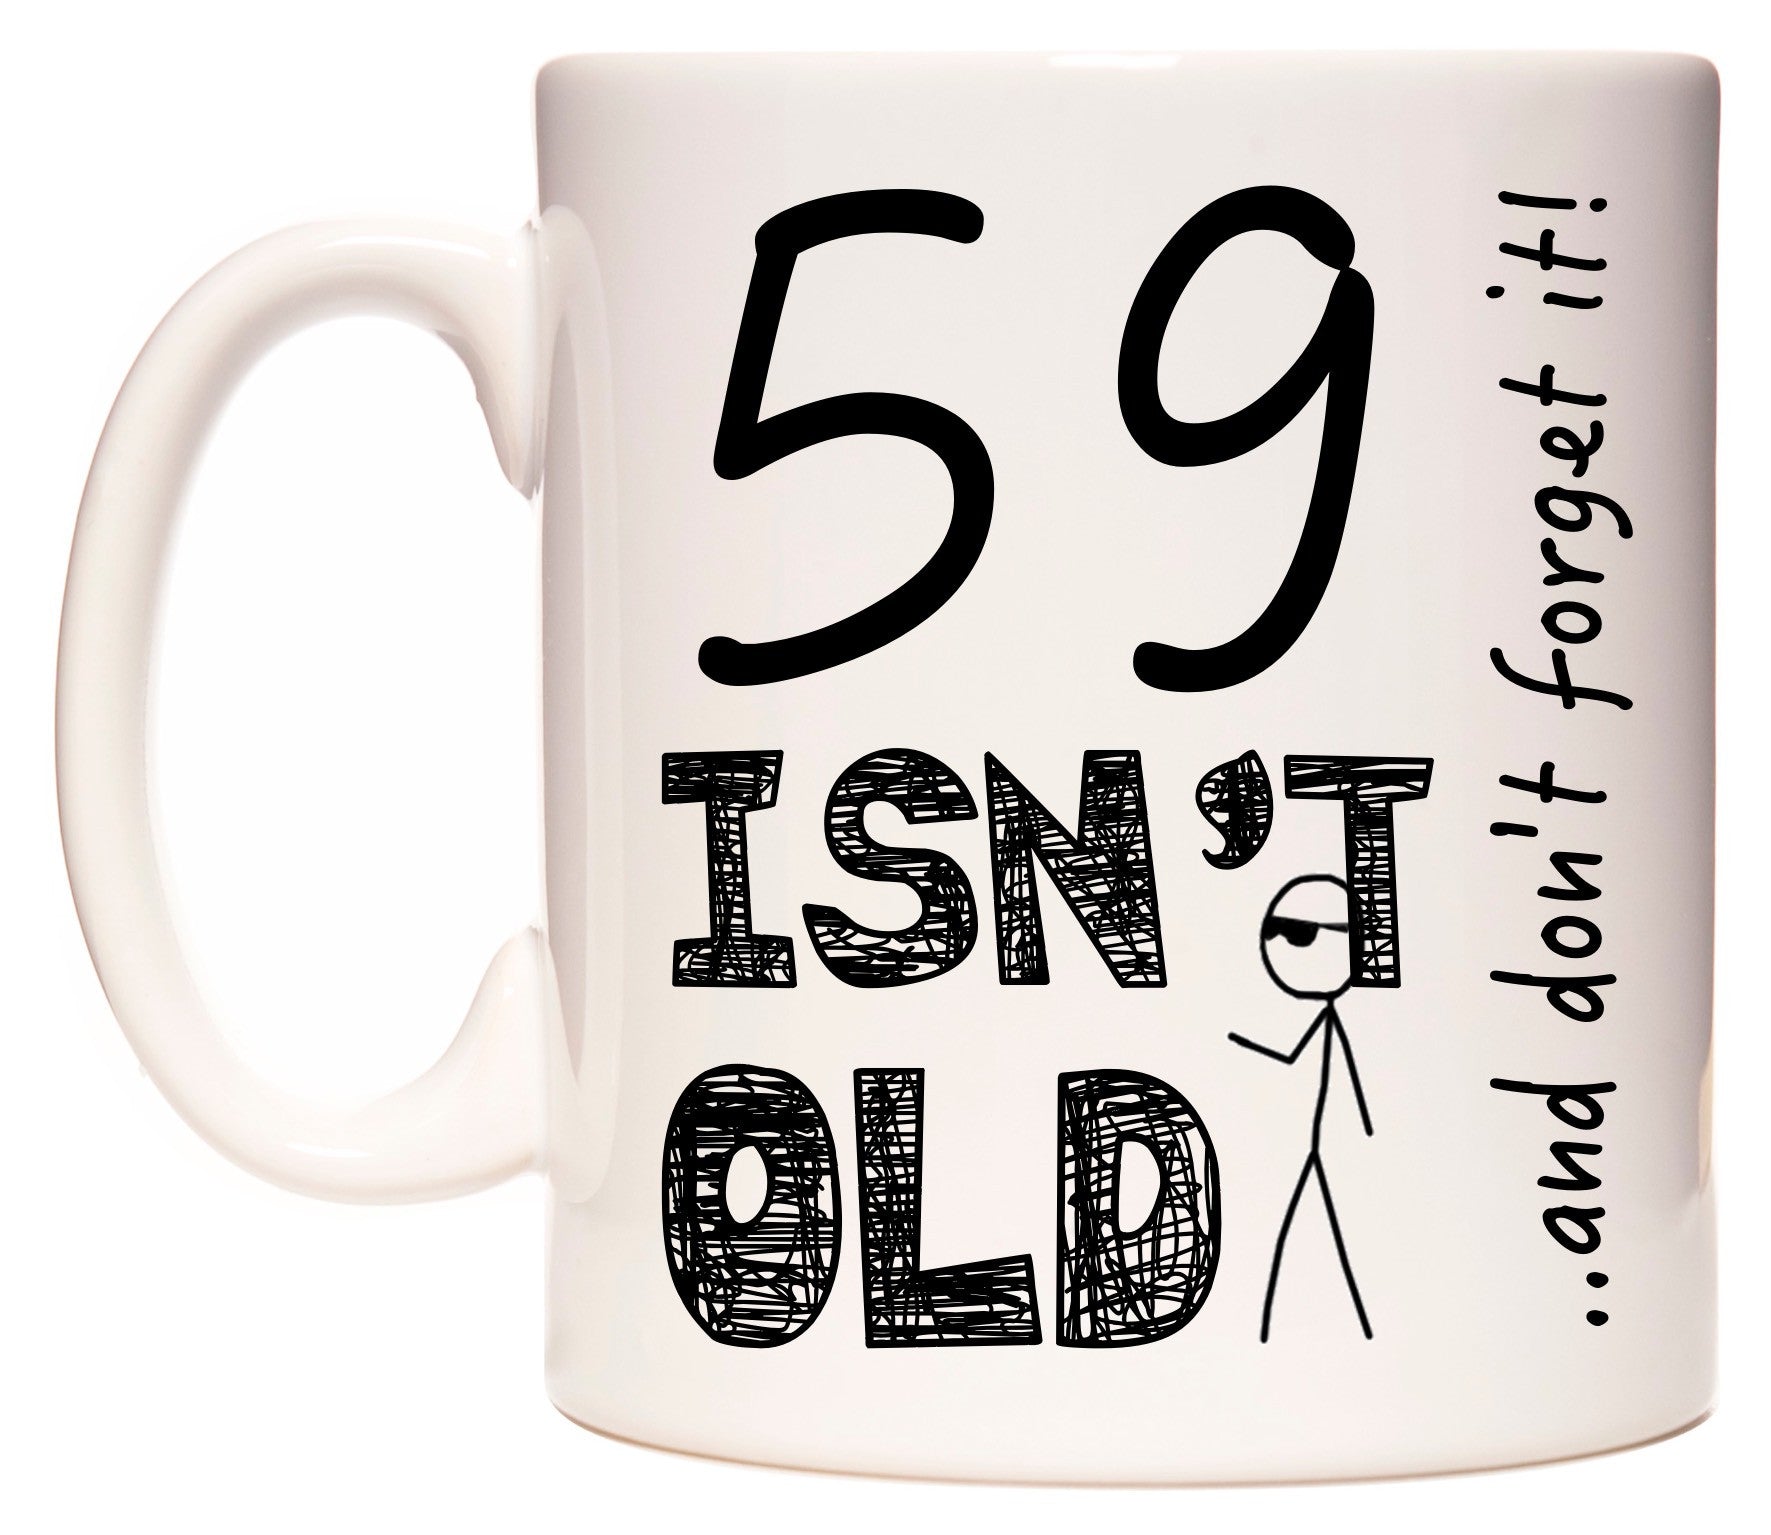 This mug features 59 Isn't Old